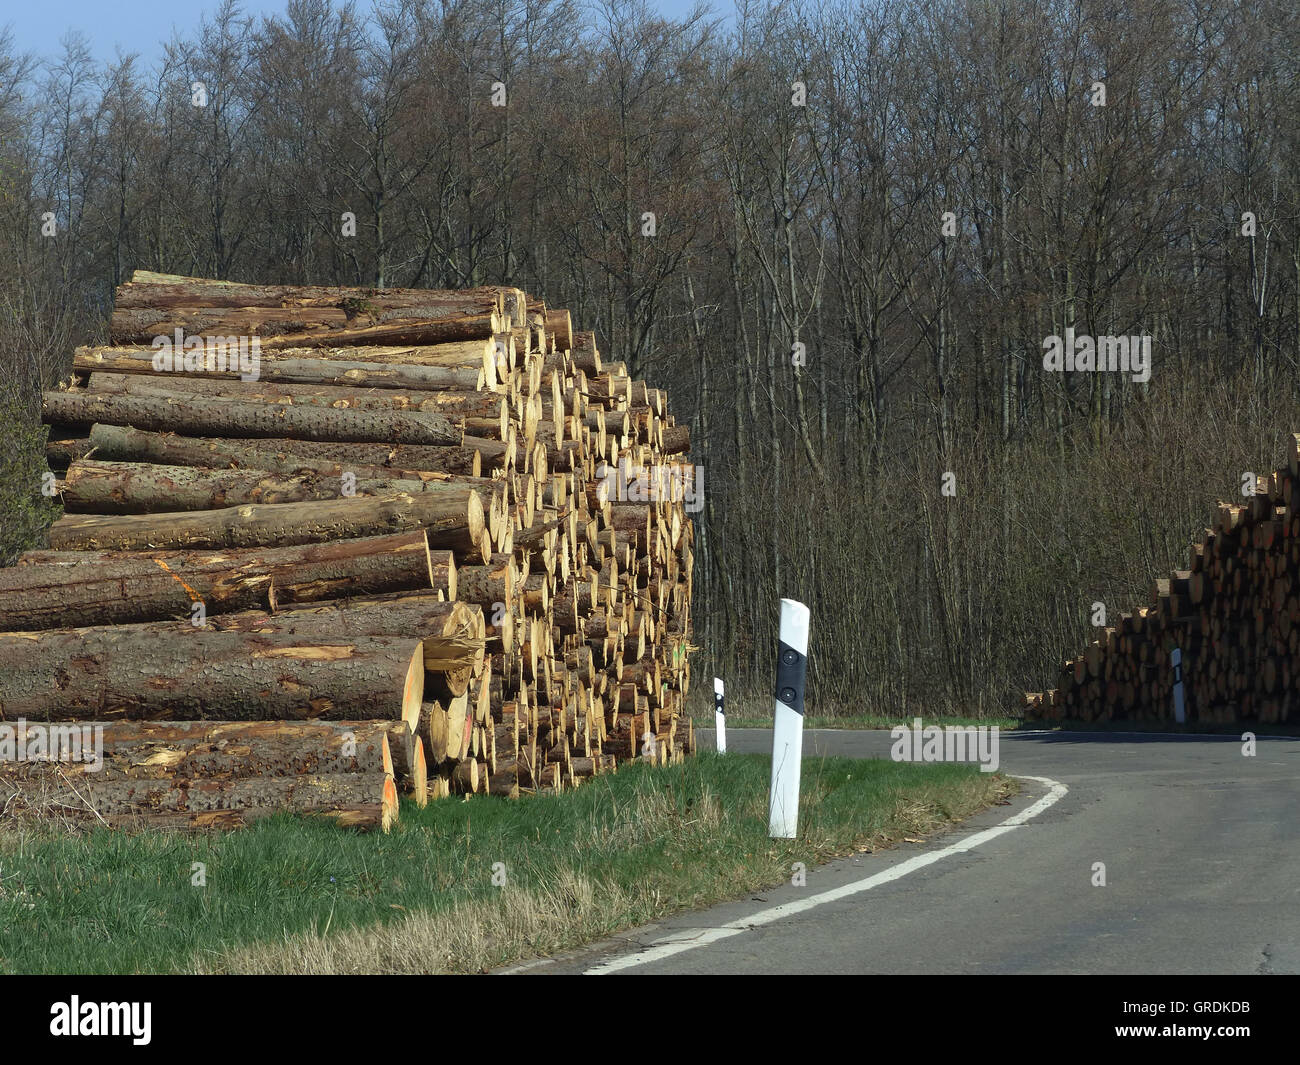 Felled Logs Piled Up Along The Road Stock Photo